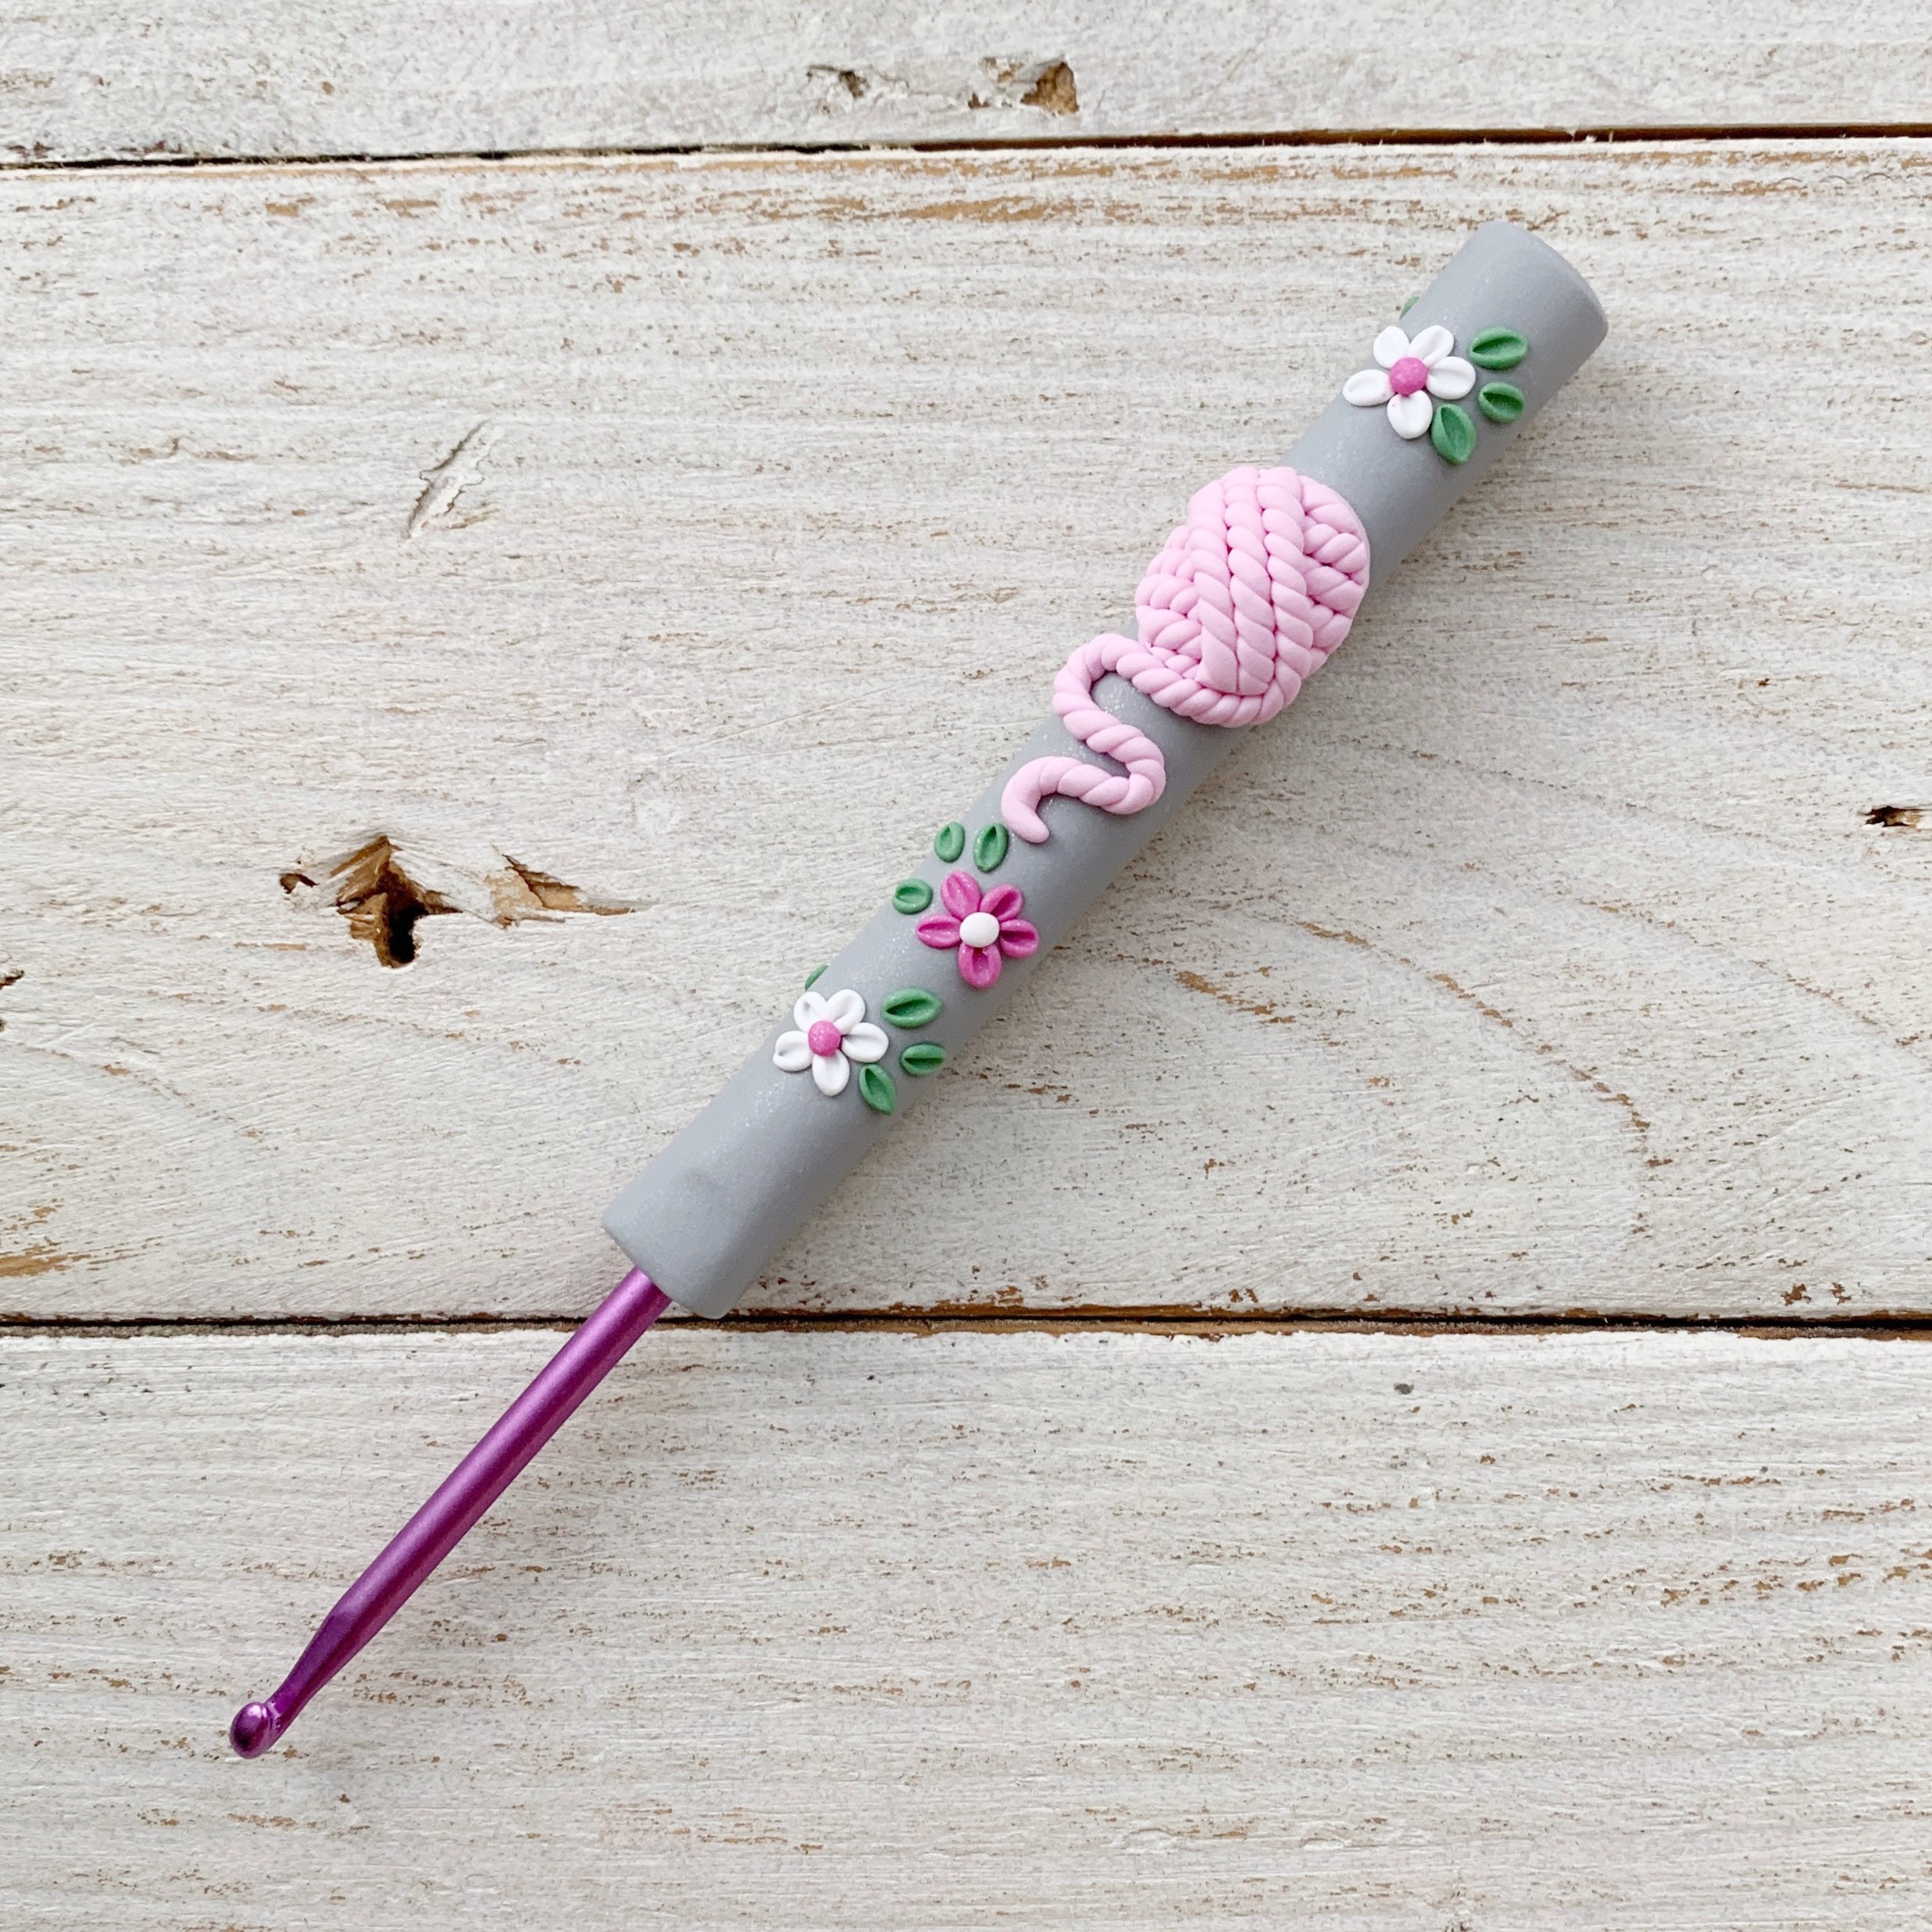 Mint and pink yarn ball magnetic needle minder, needle holder, cross stitch  gifts, gift for her, crochet tools